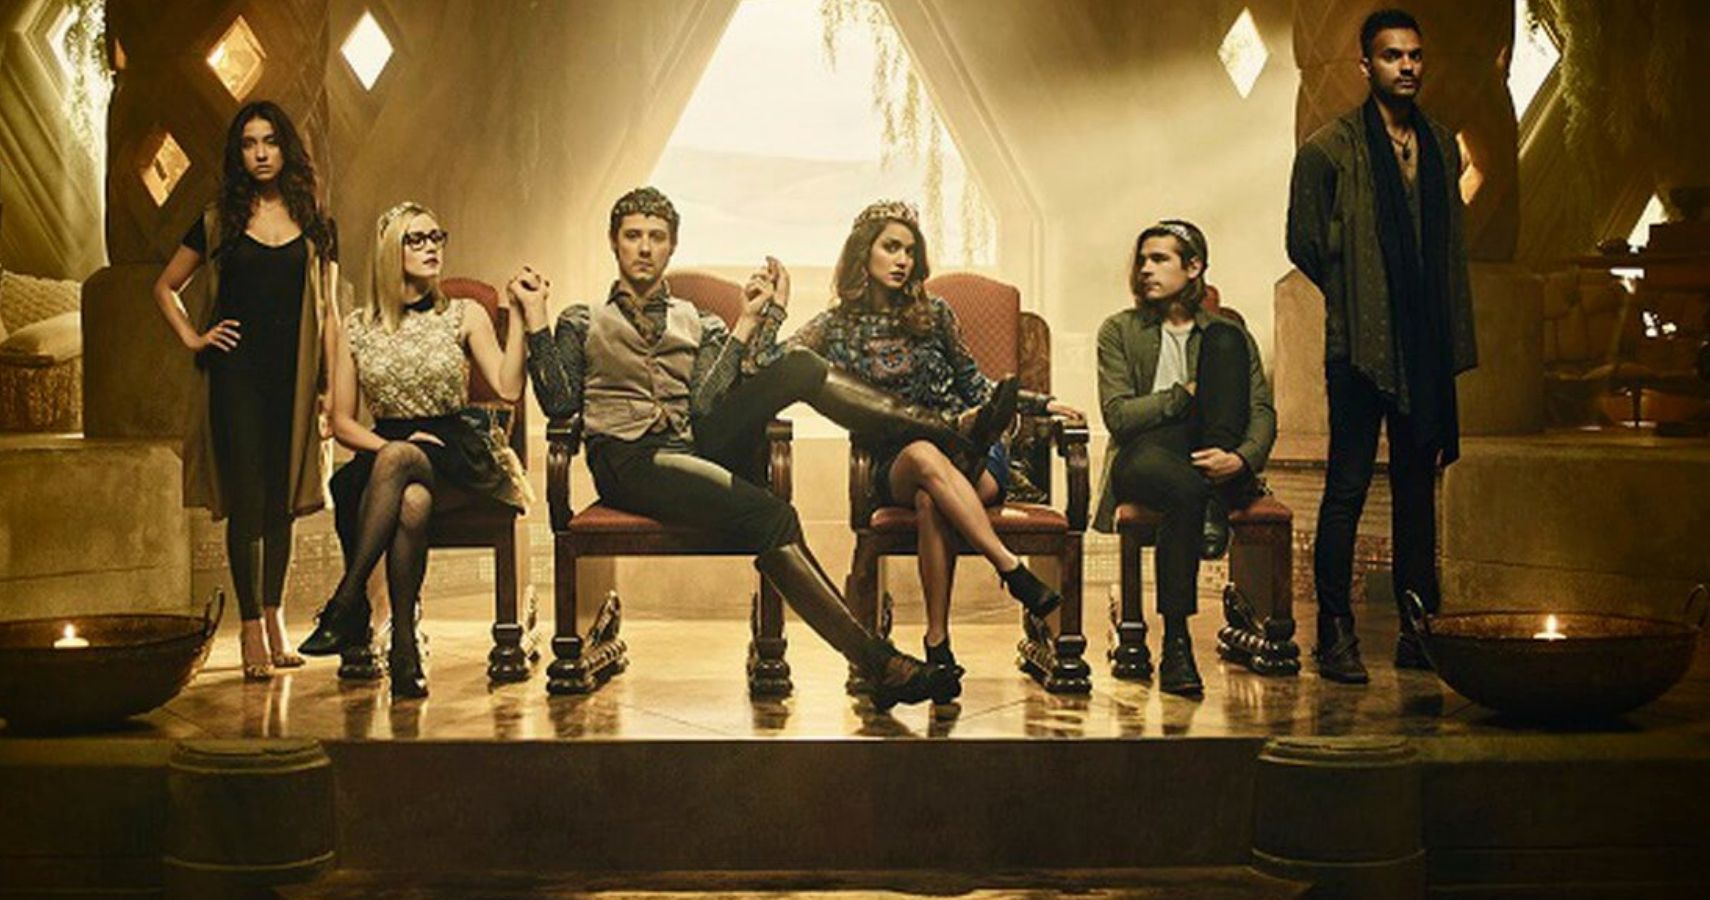 The Magicians 5 Best Relationships In The Series (& 5 Worst)